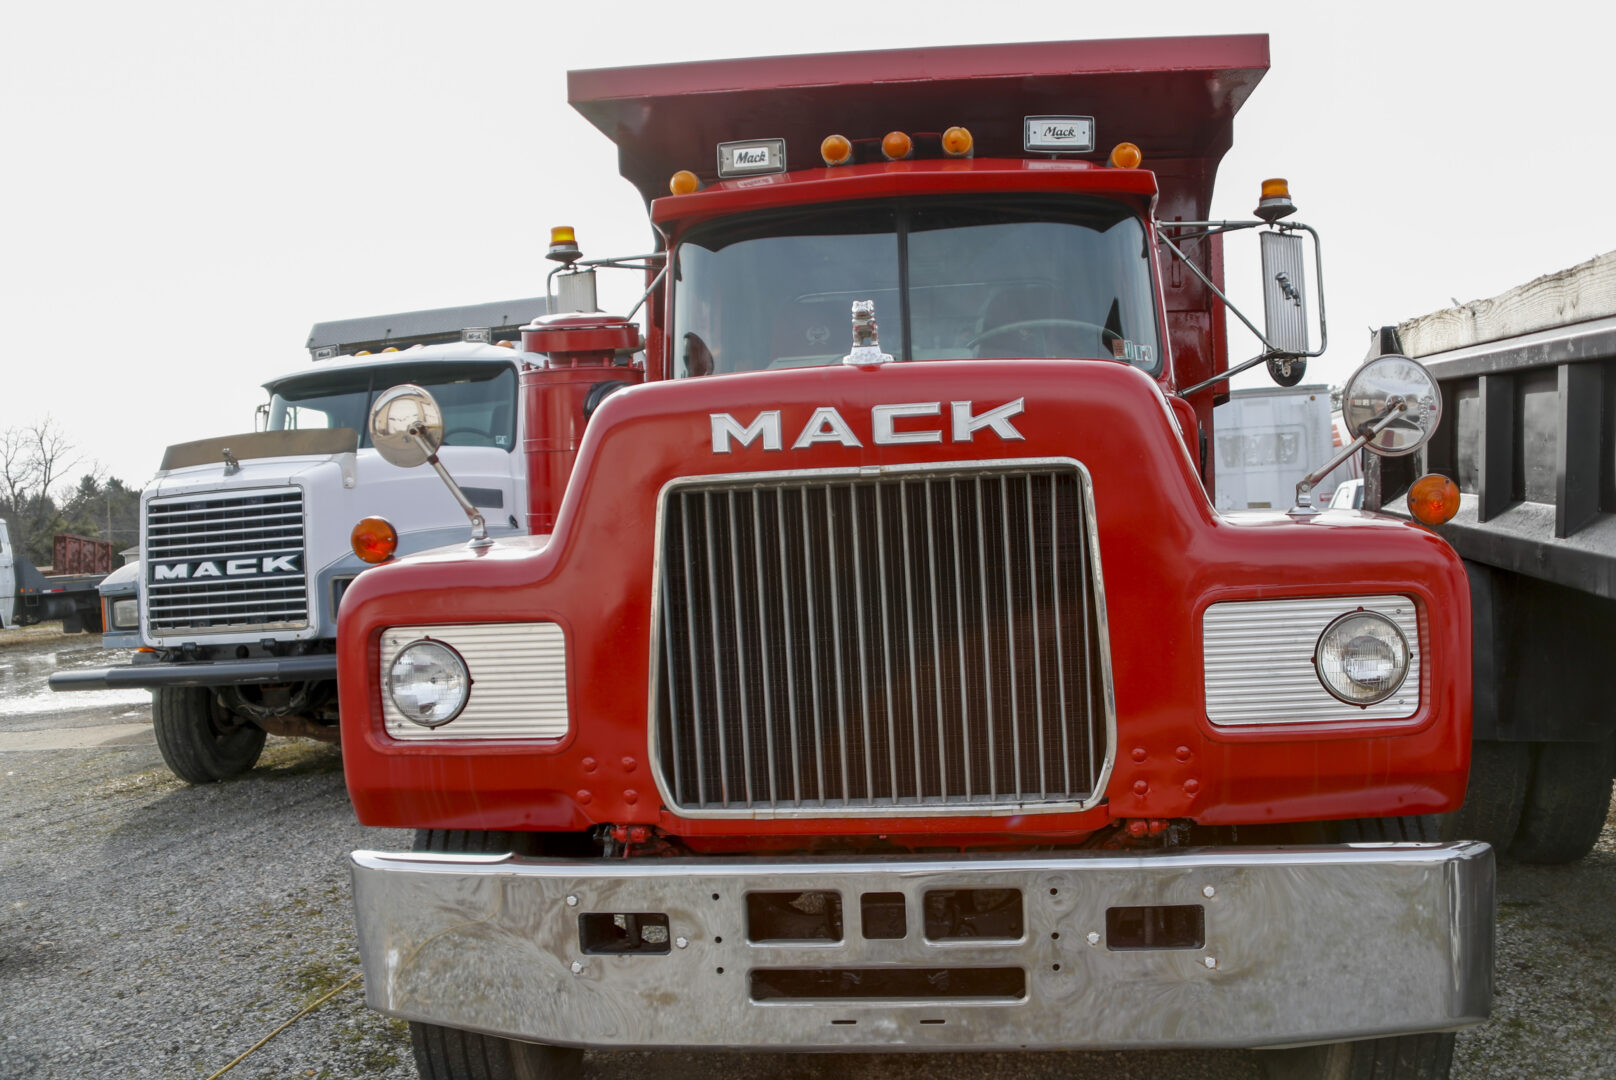 File - Used Mack trucks are parked on a lot in Evans City, Pa., on Jan. 9, 2020. Union workers at Mack Trucks have voted down a tentative five-year contract agreement reached with the company. 